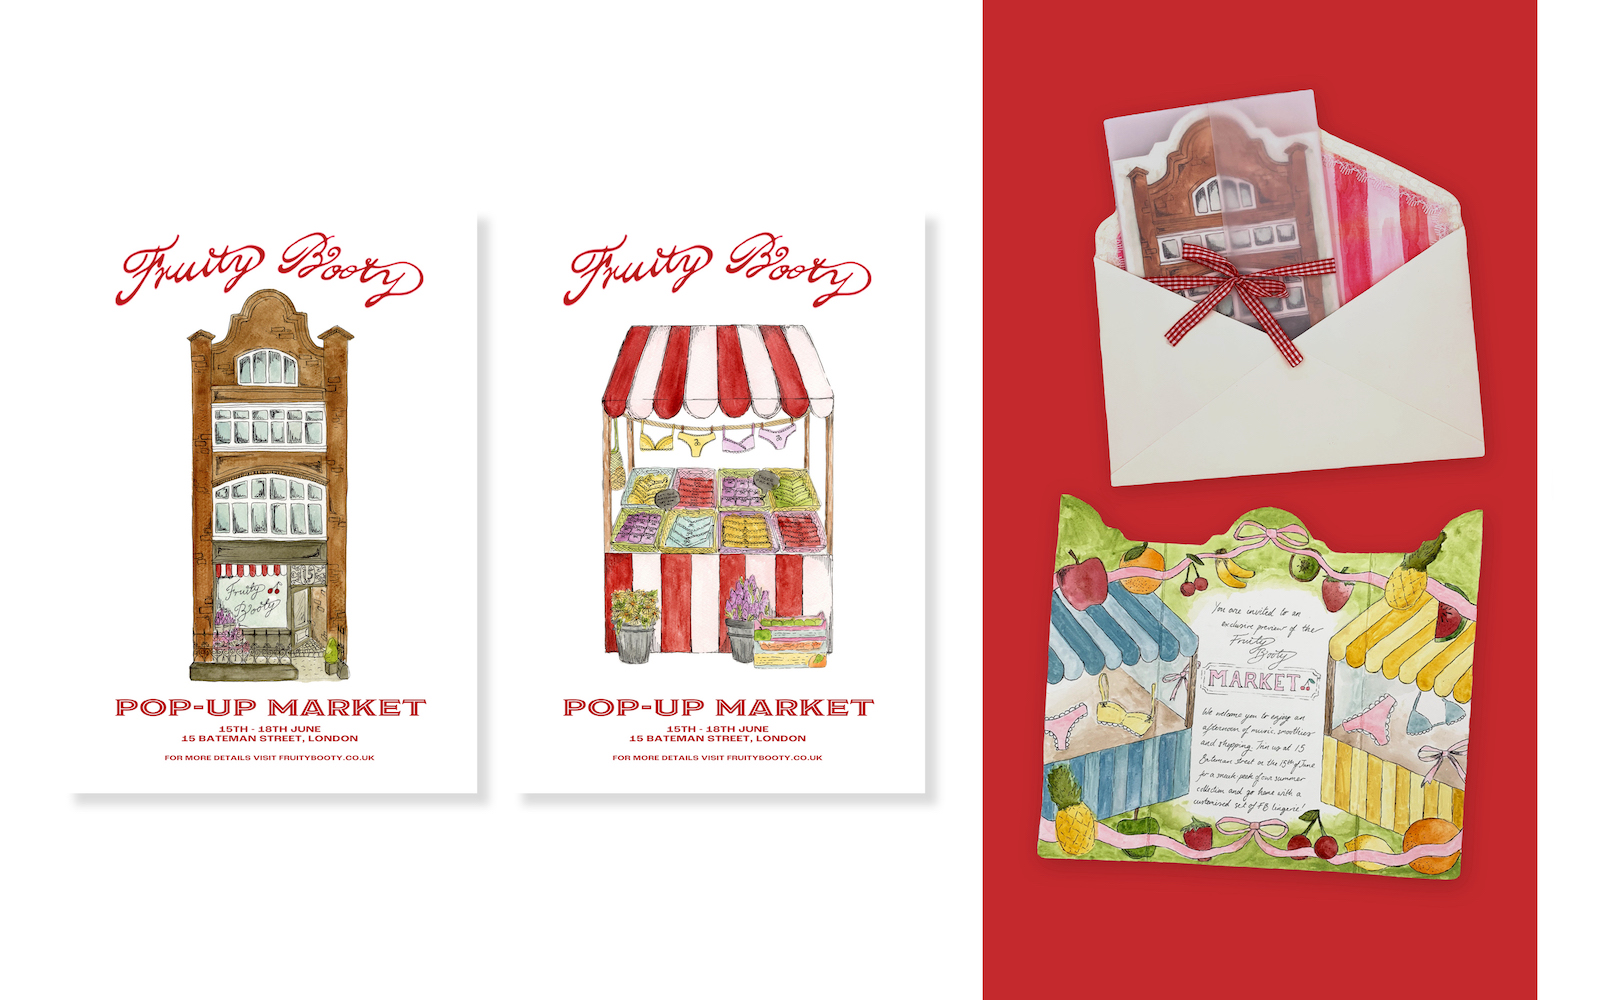 Posters and invitations designed by Elle Hart, both assets are illustrated using watercolour.